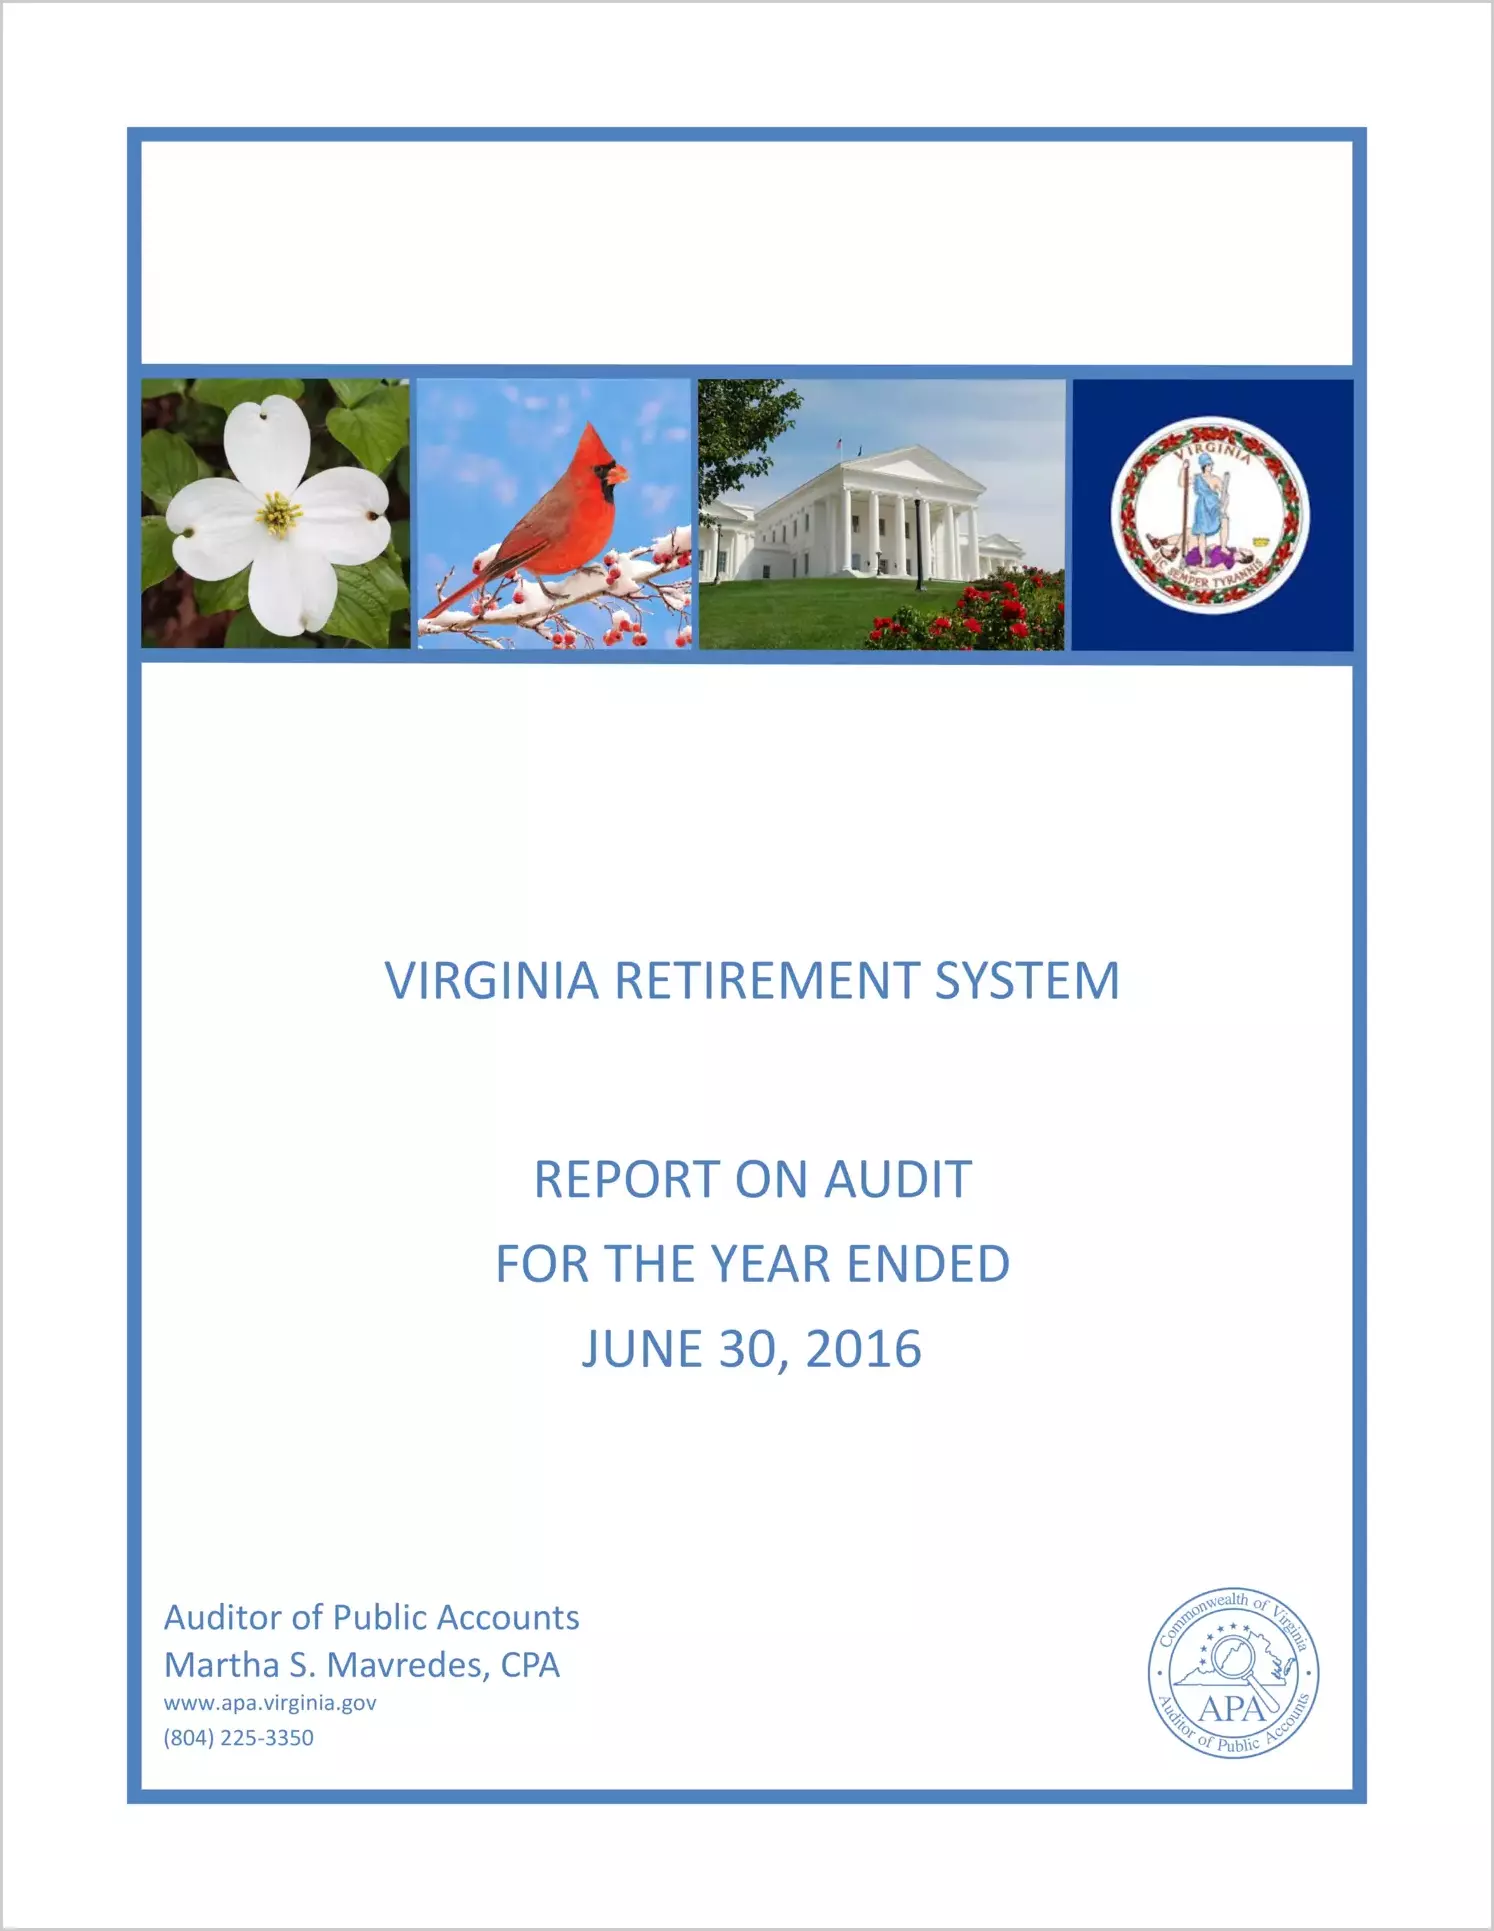 Virginia Retirement System for the year ended June 30, 2016